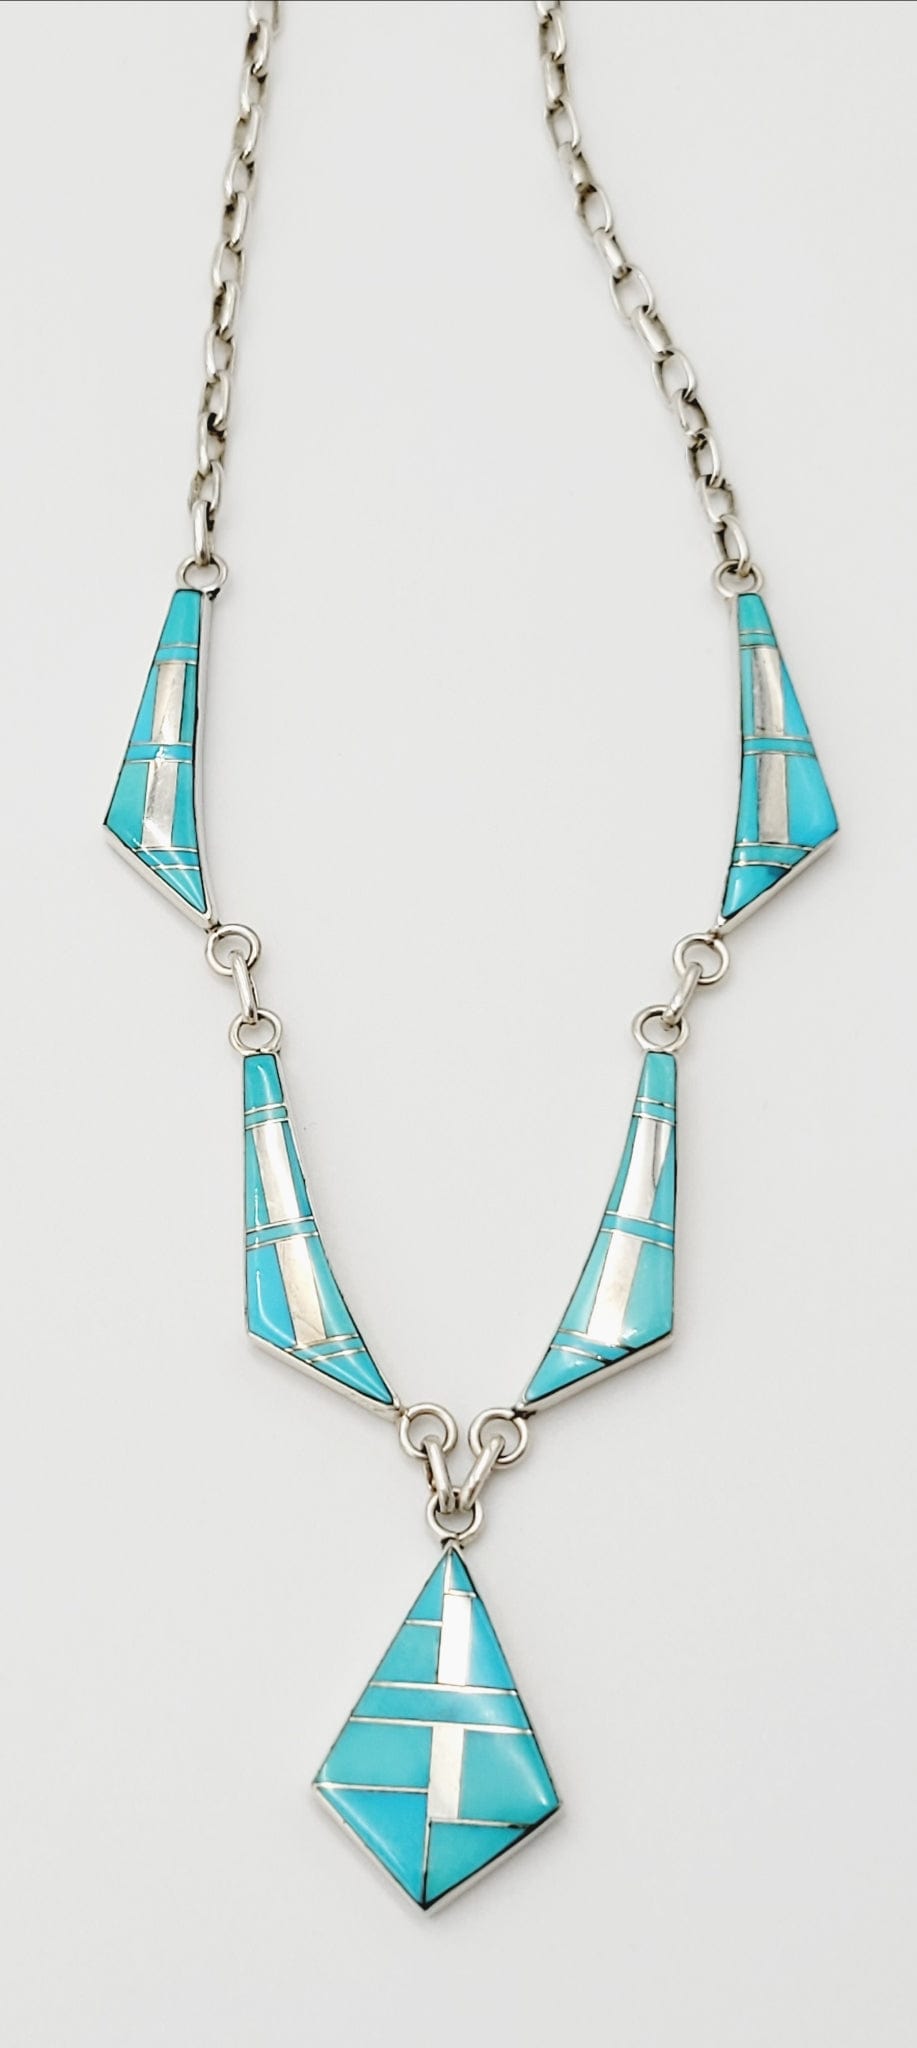 DM Begay Jewelry Navajo Artist DM Begay Sterling Turquoise Modernist Necklace Circa 1990s